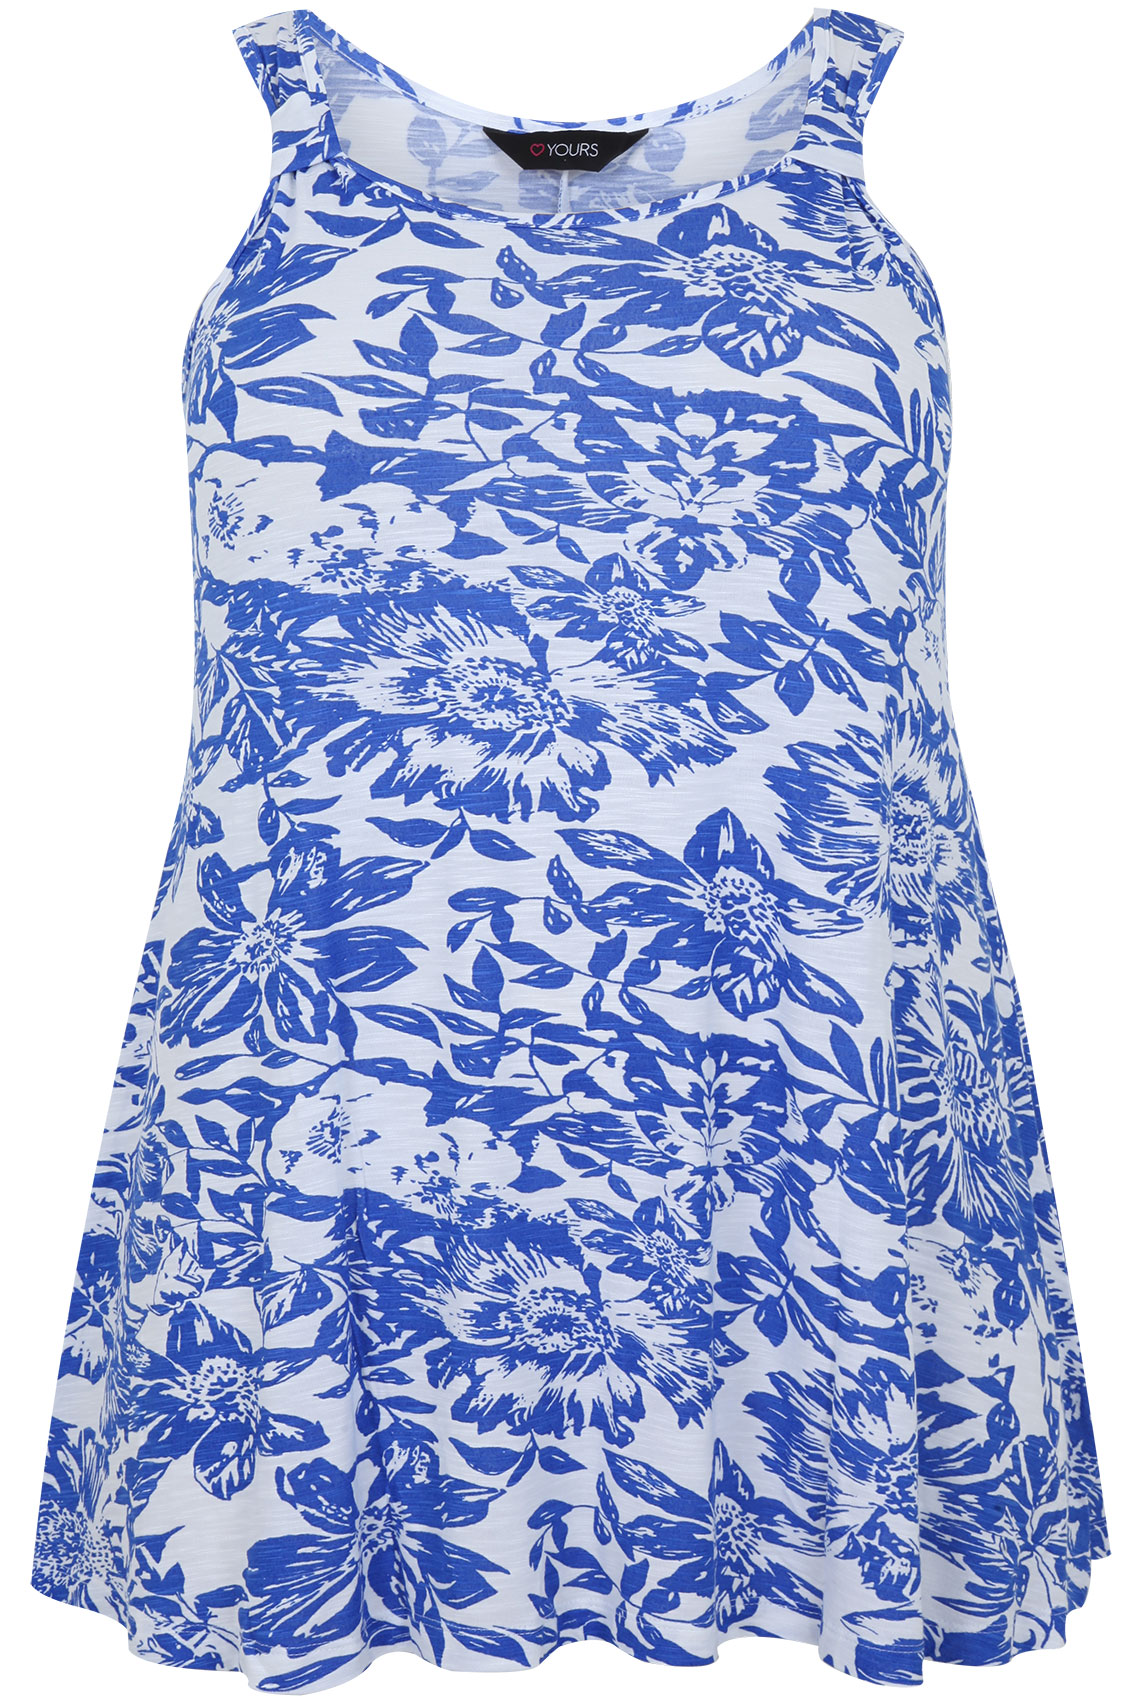 Blue & White All Over Abstract Print Sleeveless Top Plus Size 16 to 32